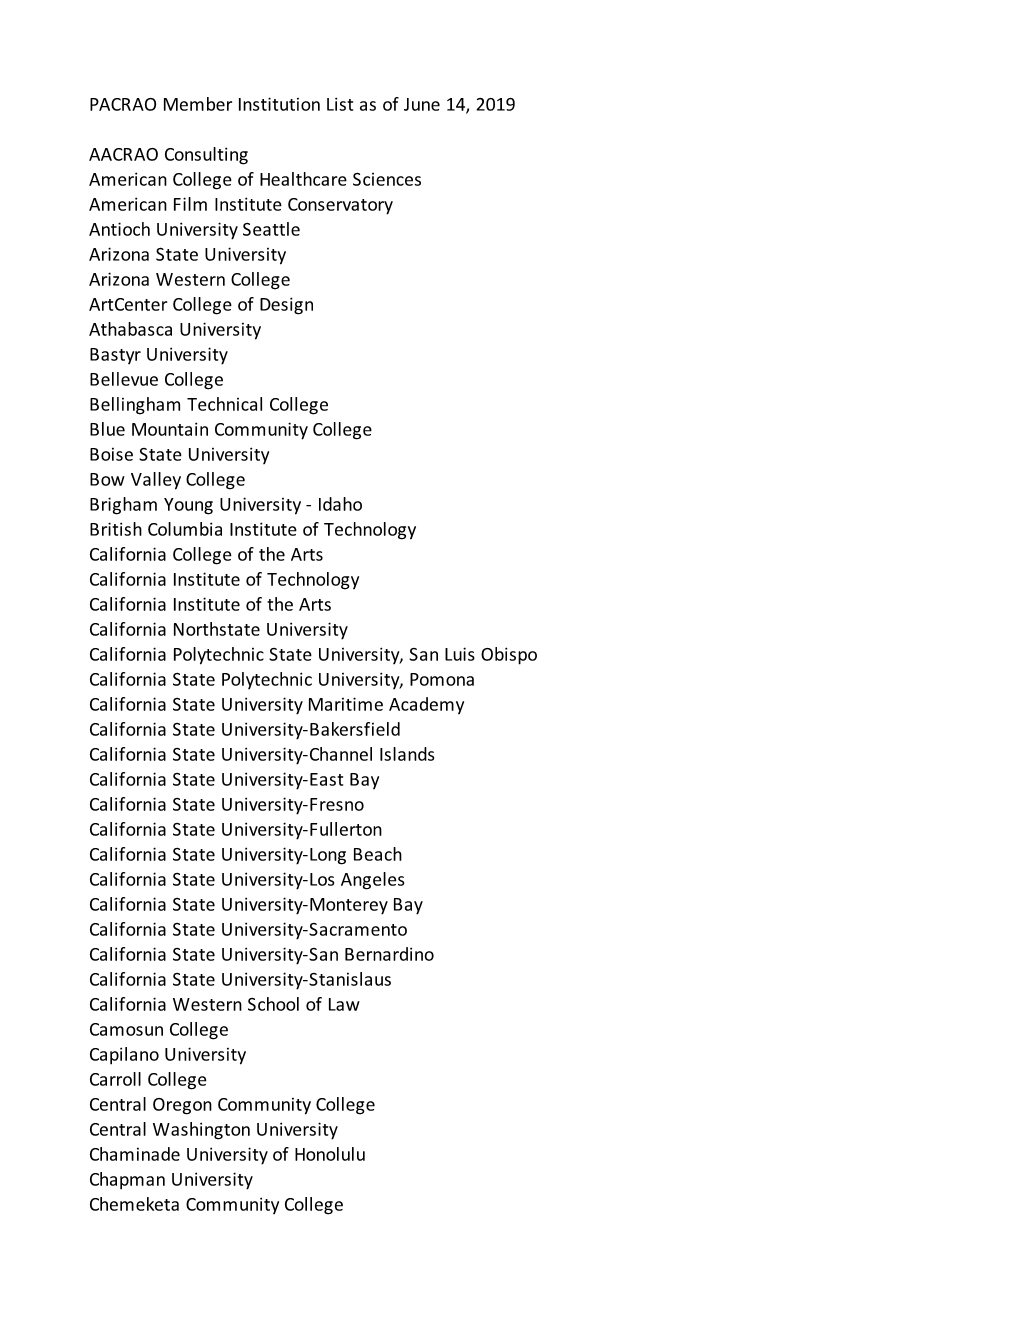 PACRAO Member Institution List As of June 14, 2019 AACRAO Consulting